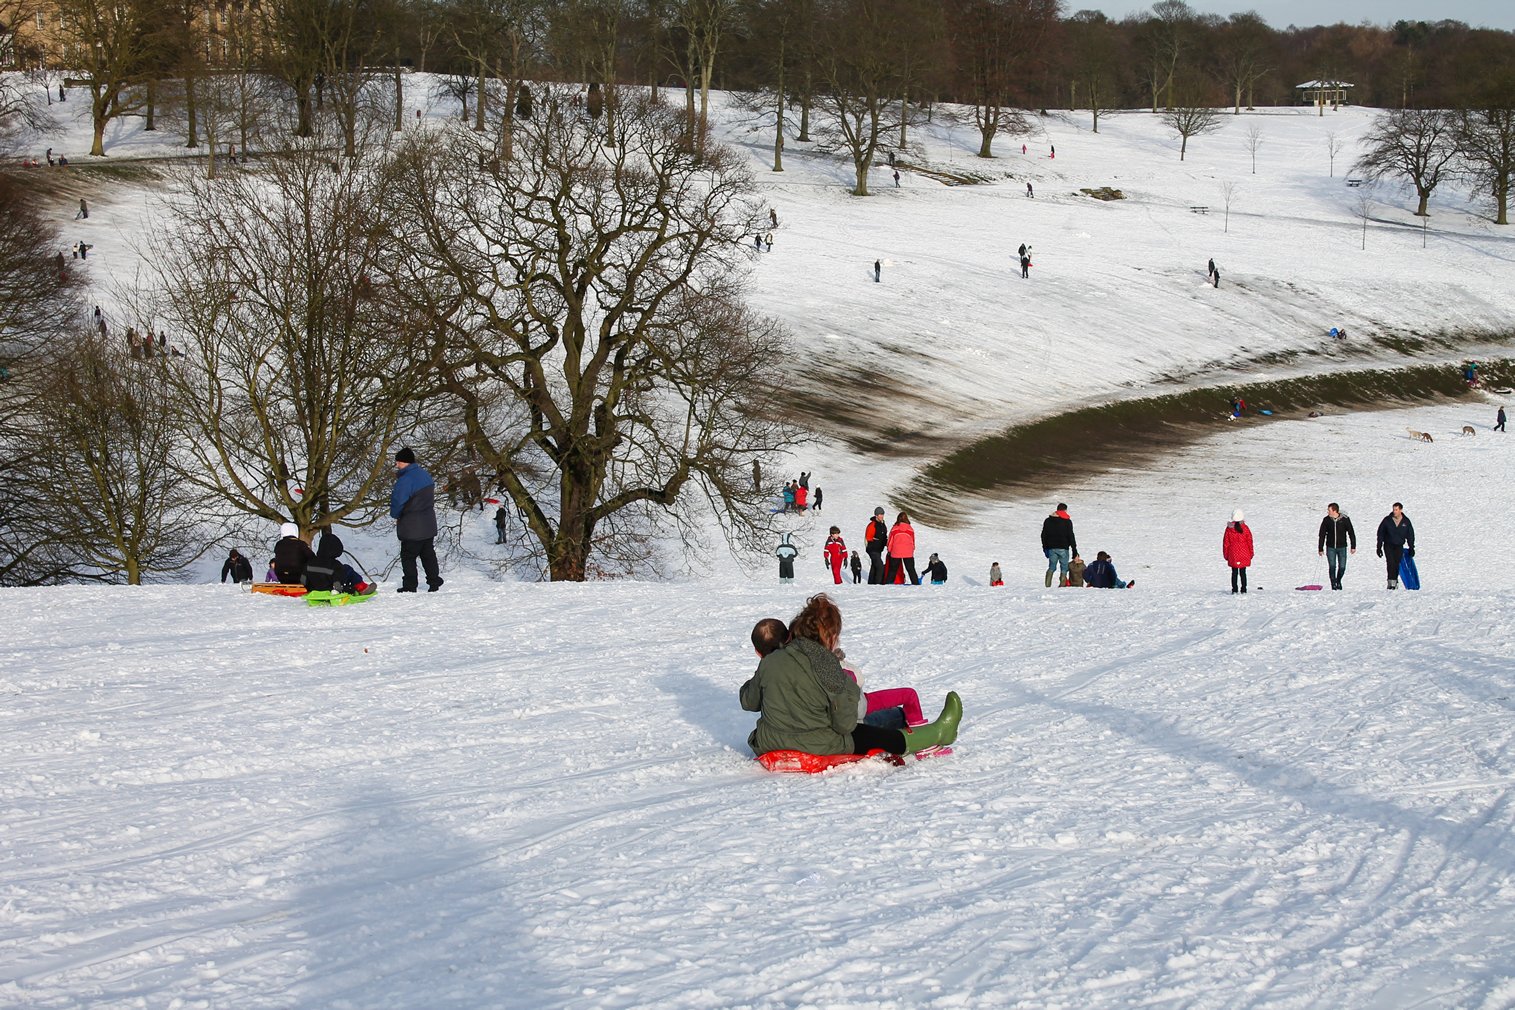 Image name sledging roundhay park the 1 image from the post Cold weather activities in Yorkshire in Yorkshire.com.